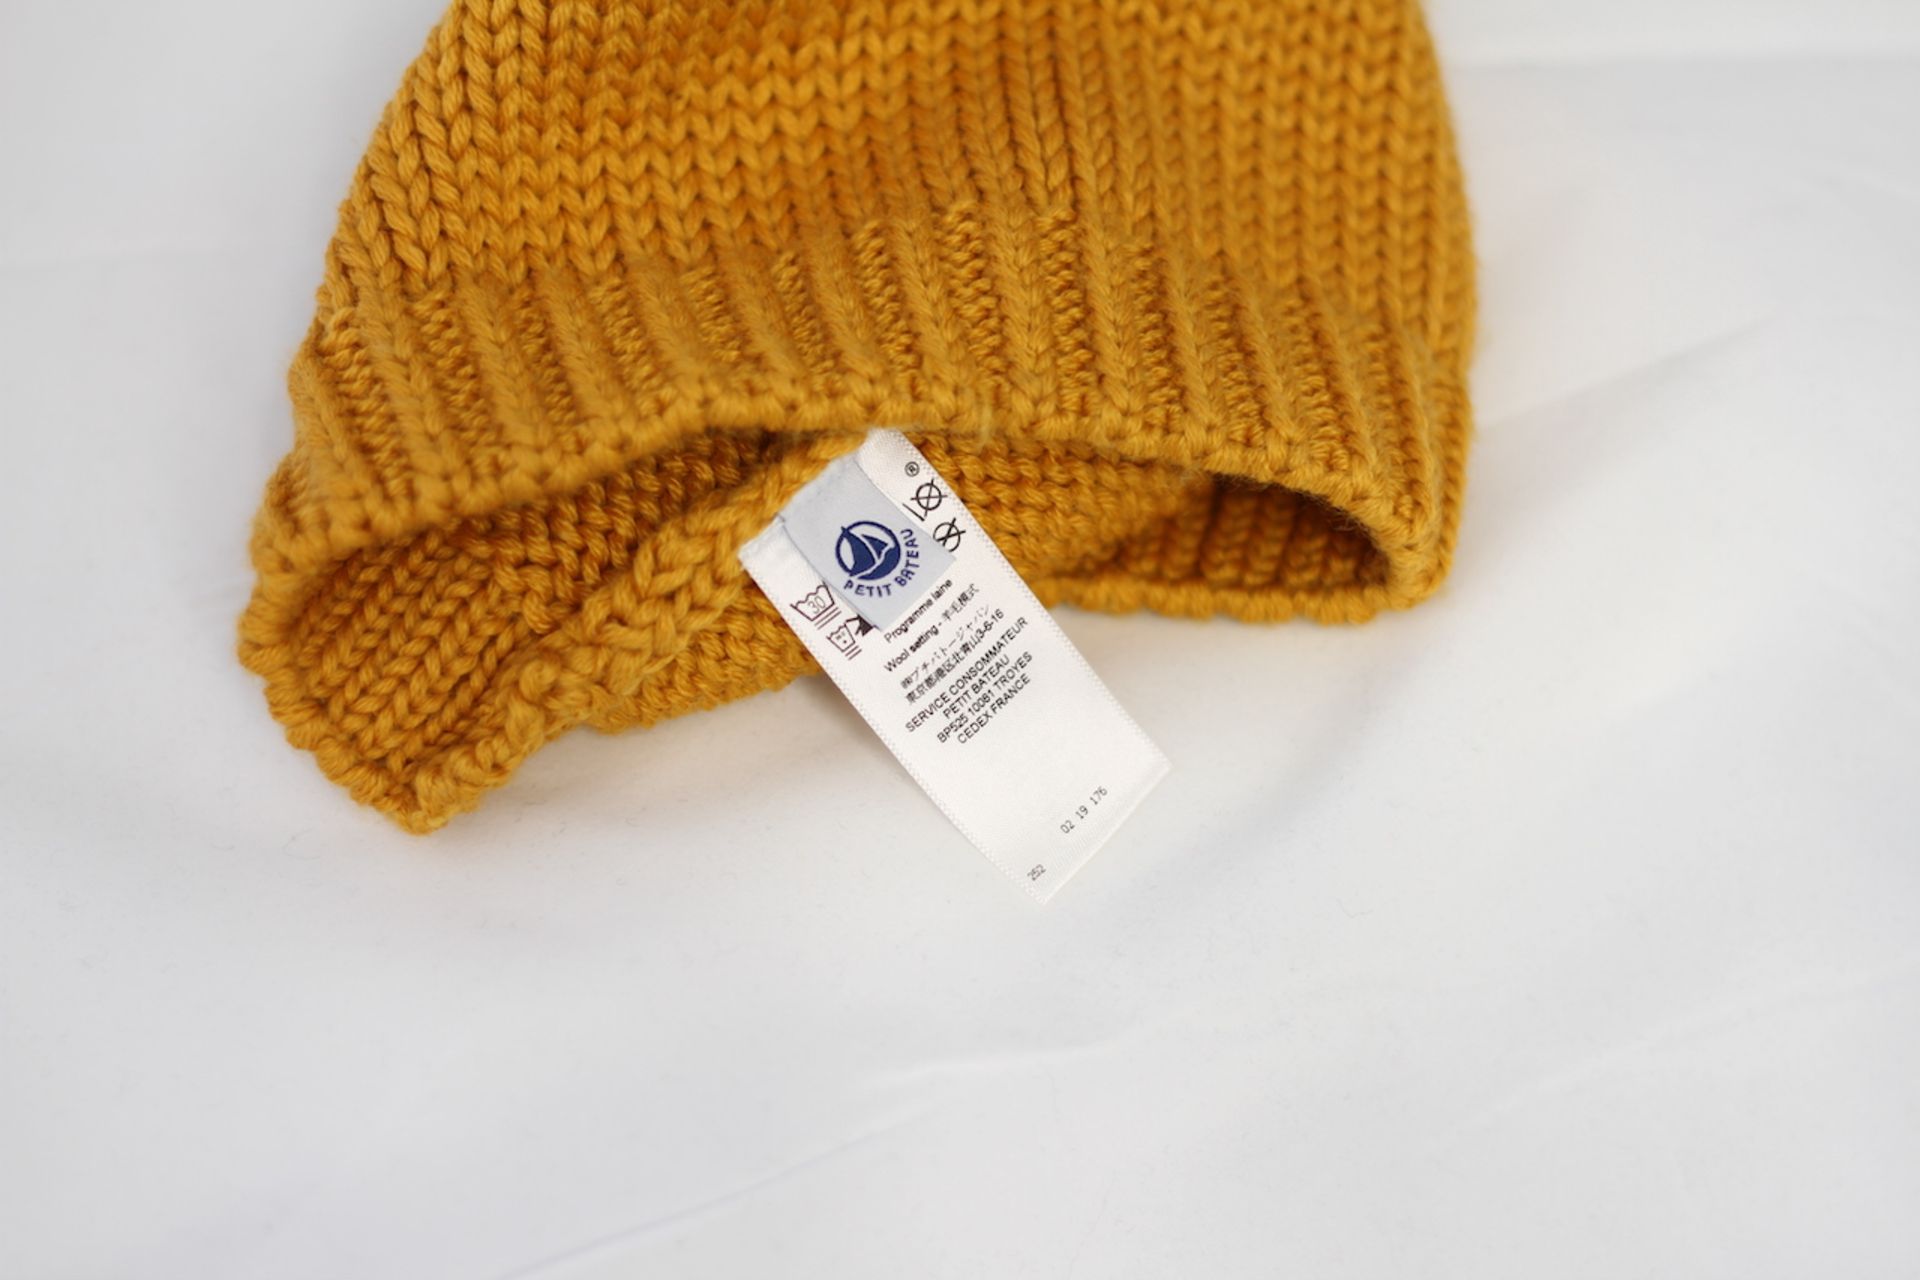 PETIT BATEAU BABY HAT, Colour : MUSTARD, AGE: UNKNOWN, SIZE: 59CM, CONDITION GRADE: 1 VERY GOOD * TO - Image 2 of 2